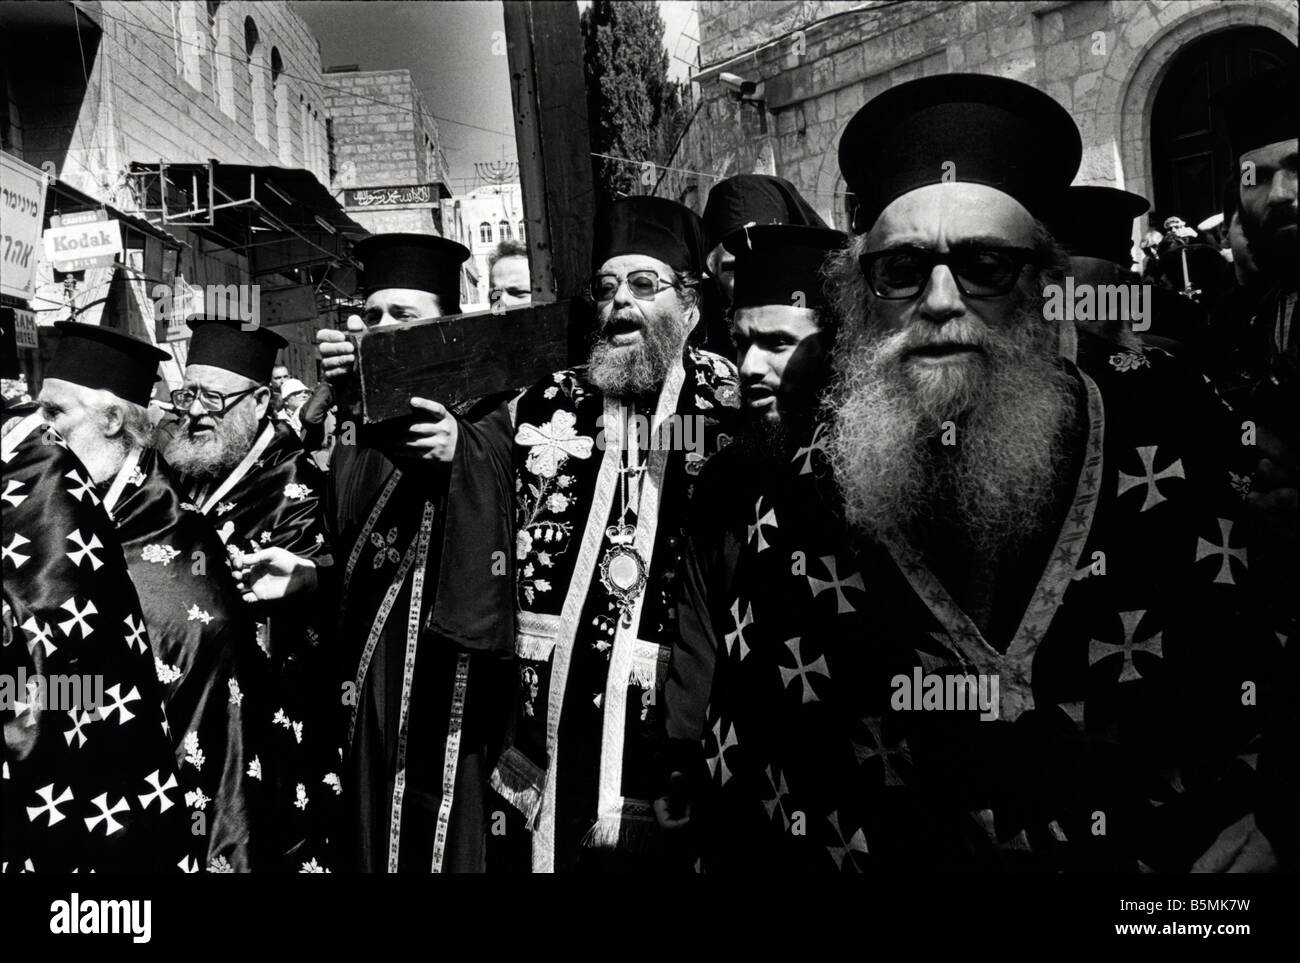 Greek Orthodox priests walk up the Via Dolorosa marking the Stations of the Cross during Holy Week Jerusalem Israel Stock Photo